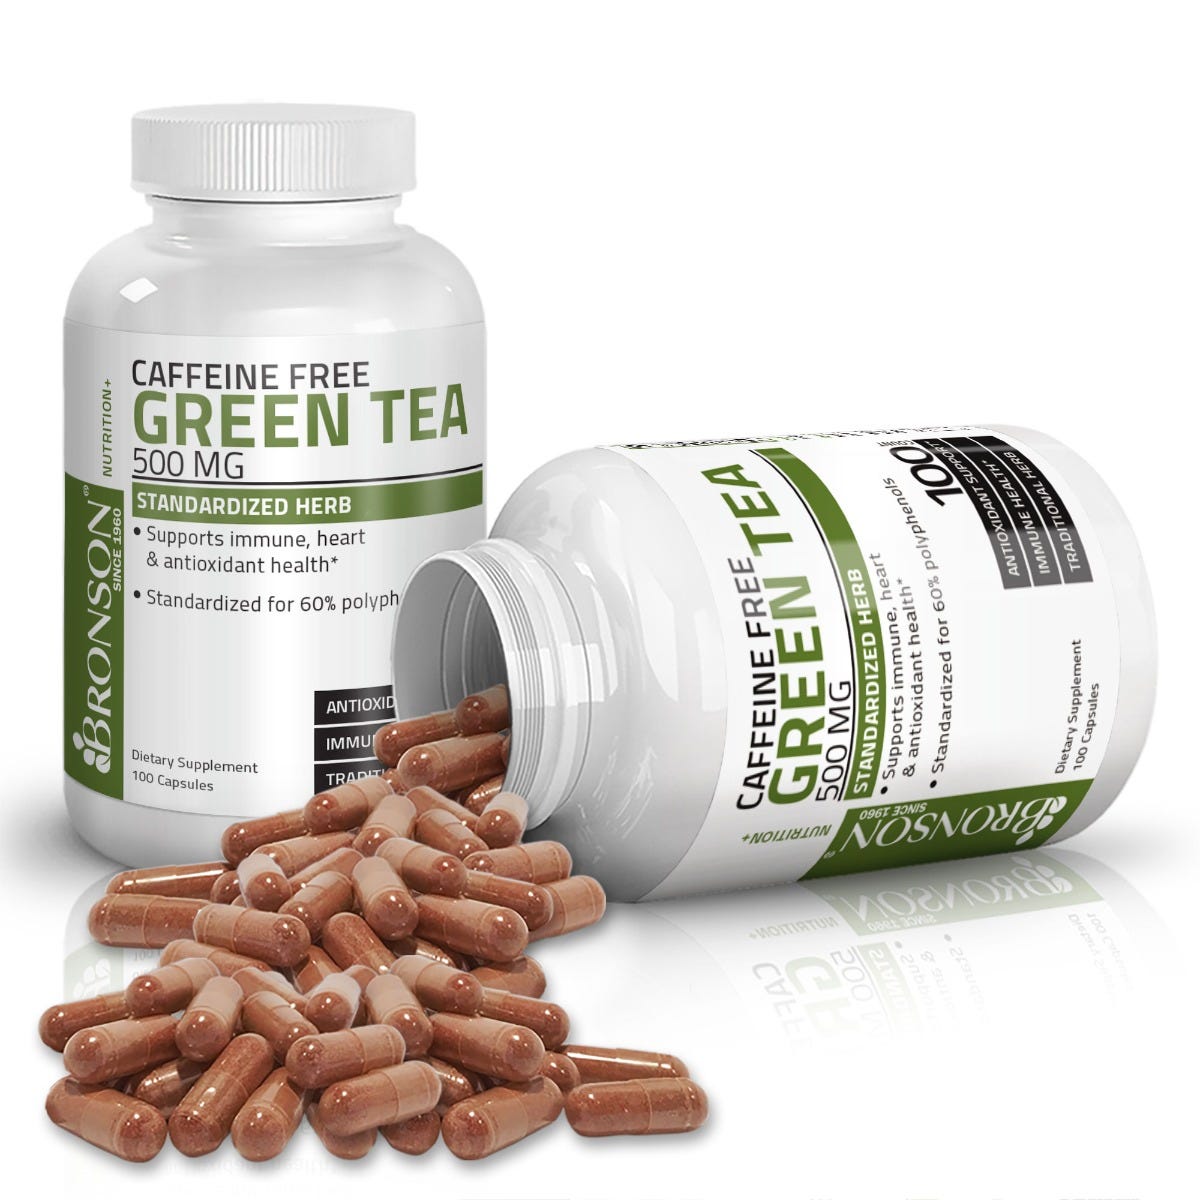 Caffeine Free Green Tea Extract - 500 mg - 100 Capsules view 3 of 5